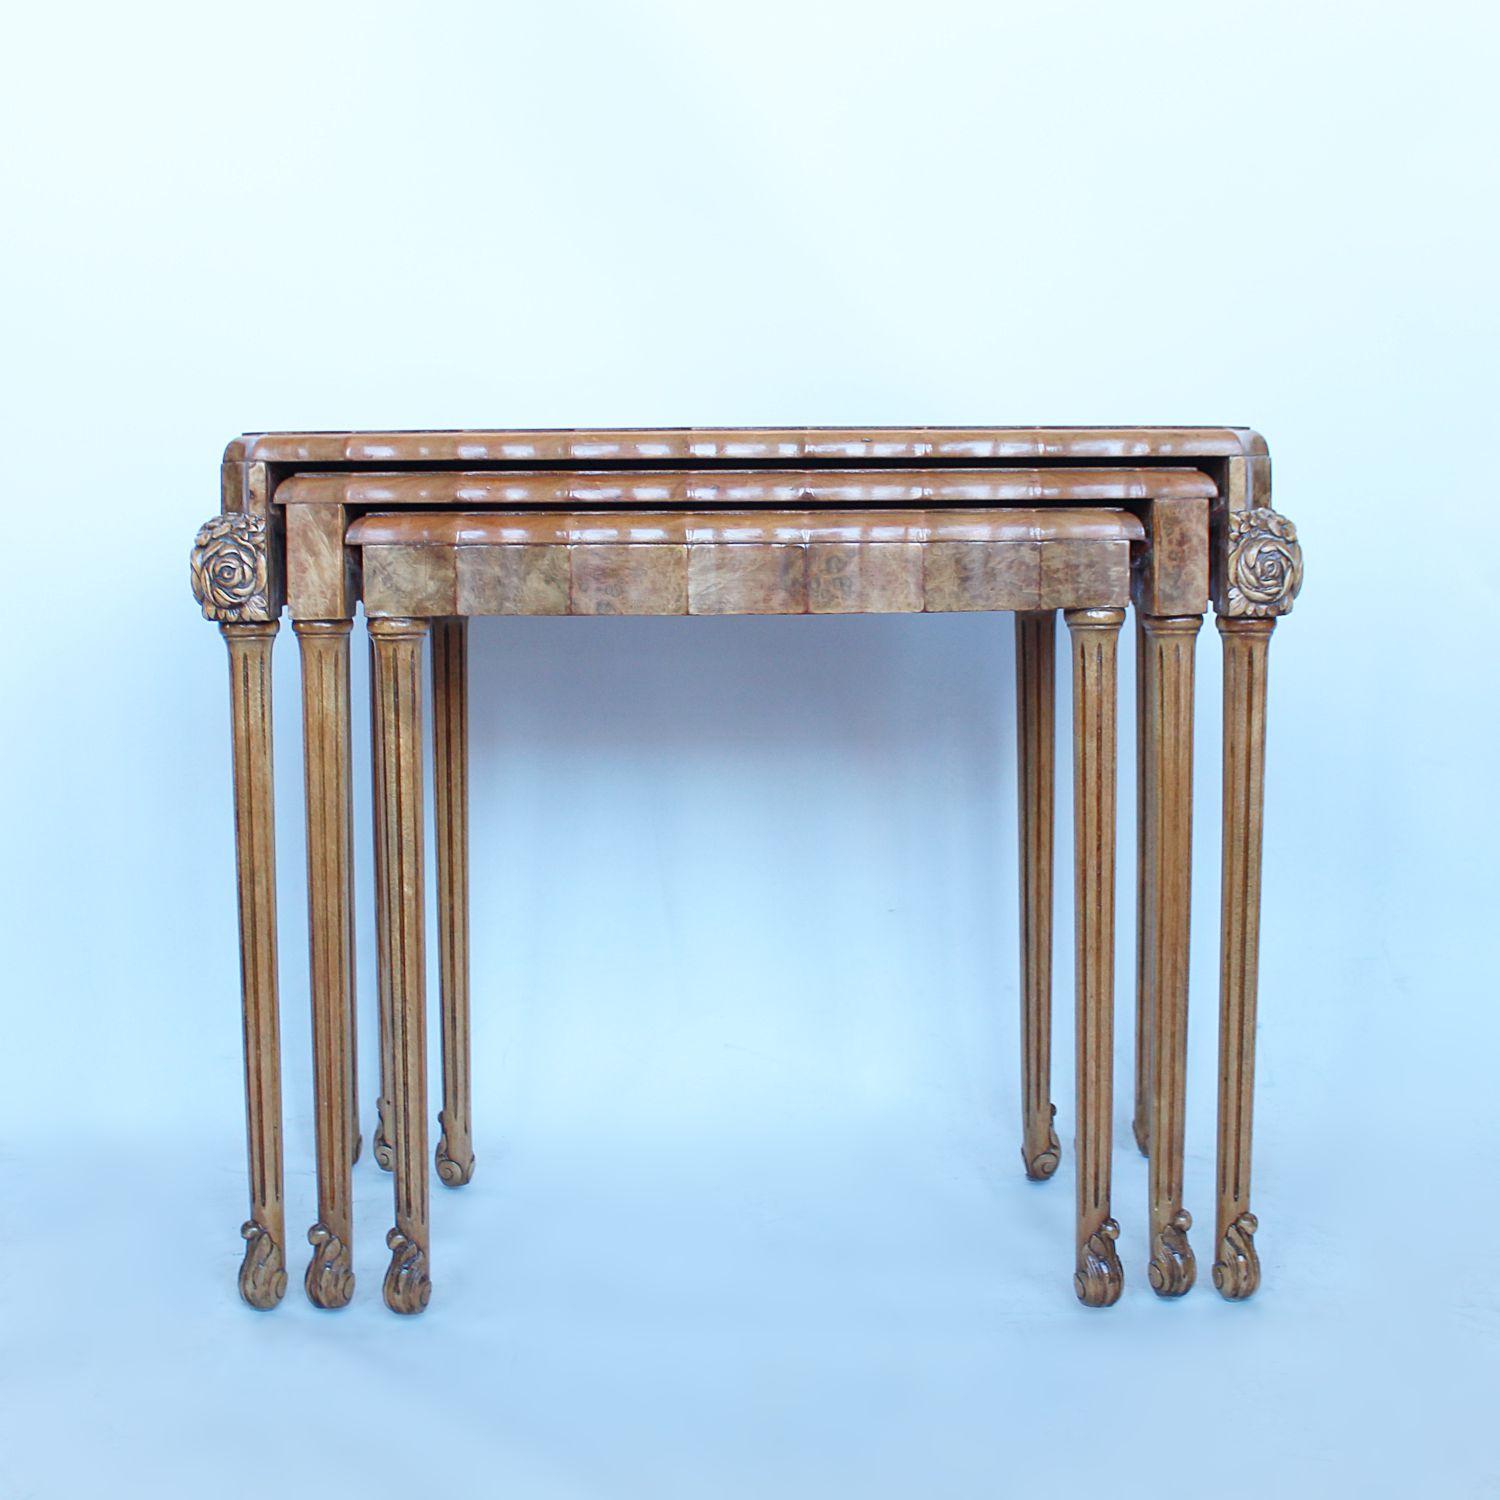 An Art Deco nest of three hanging side tables. Bow fronted with fluted shape. Set over tapering legs with scrolled feet and carved corner details. Burr walnut throughout with solid walnut legs and banding.

Dimensions: H 58cm, W 72cm, D 40cm,

H